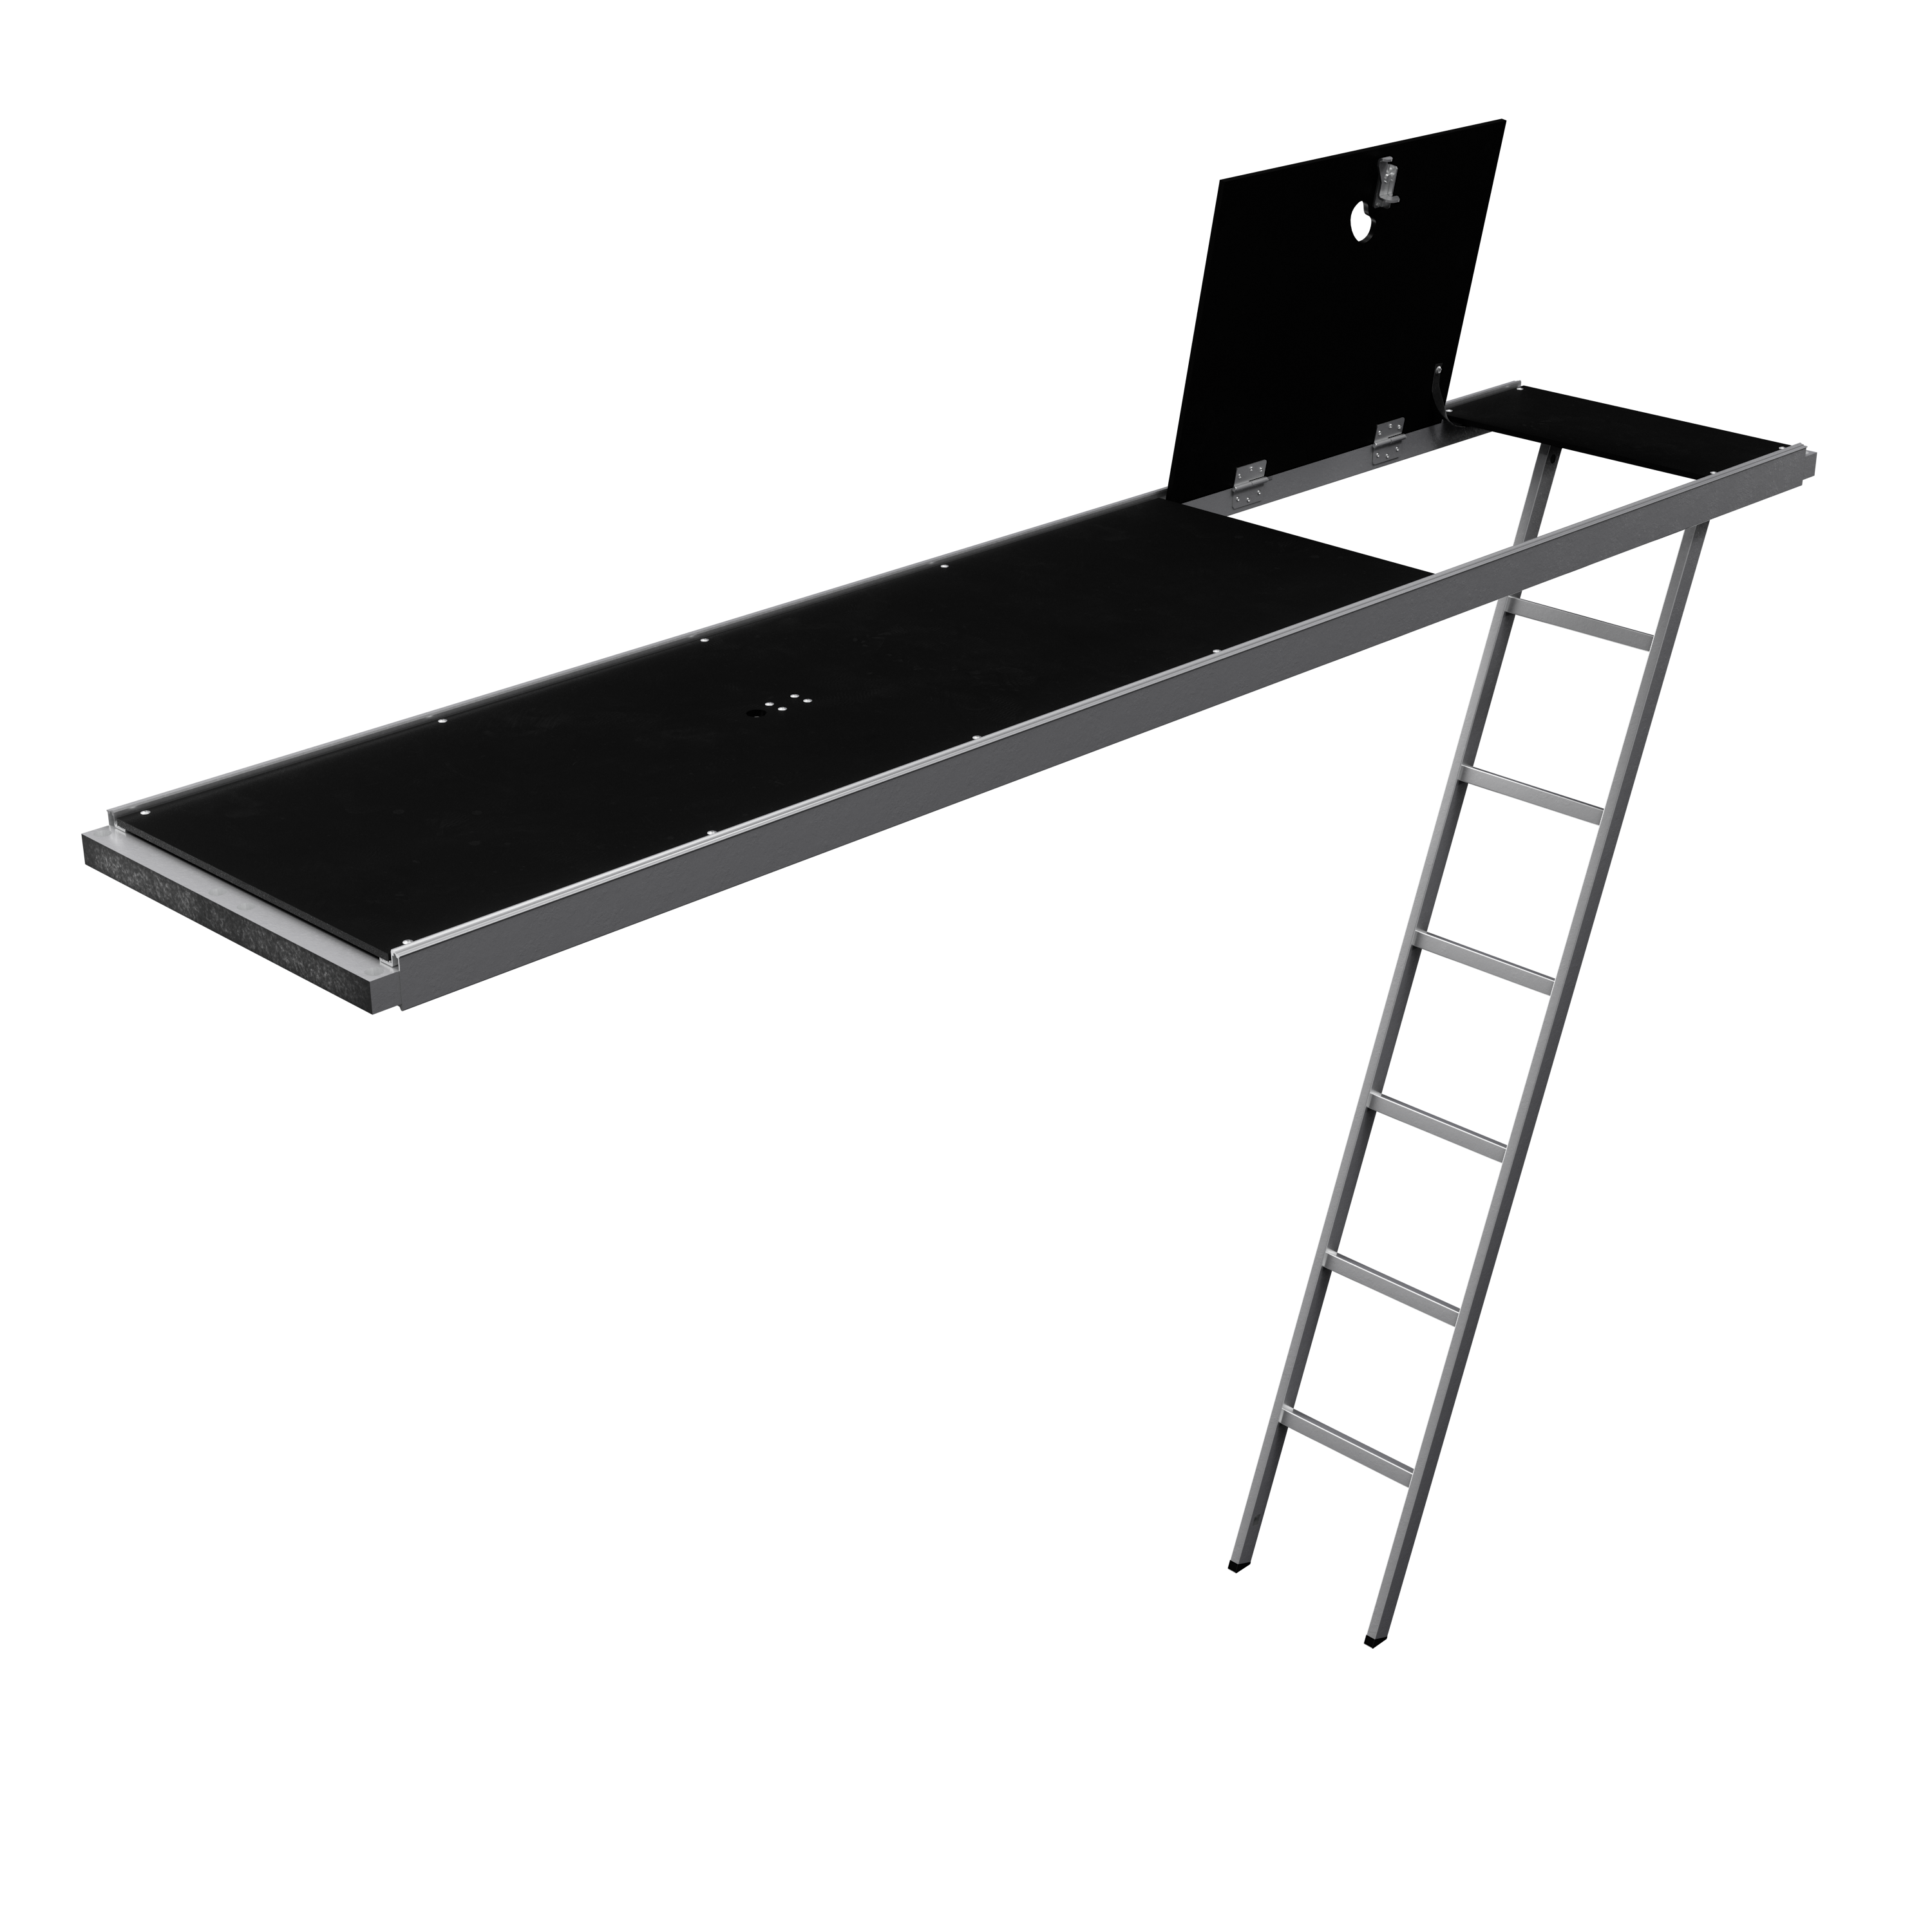 Aluminum and plywood communication platform with a ladder